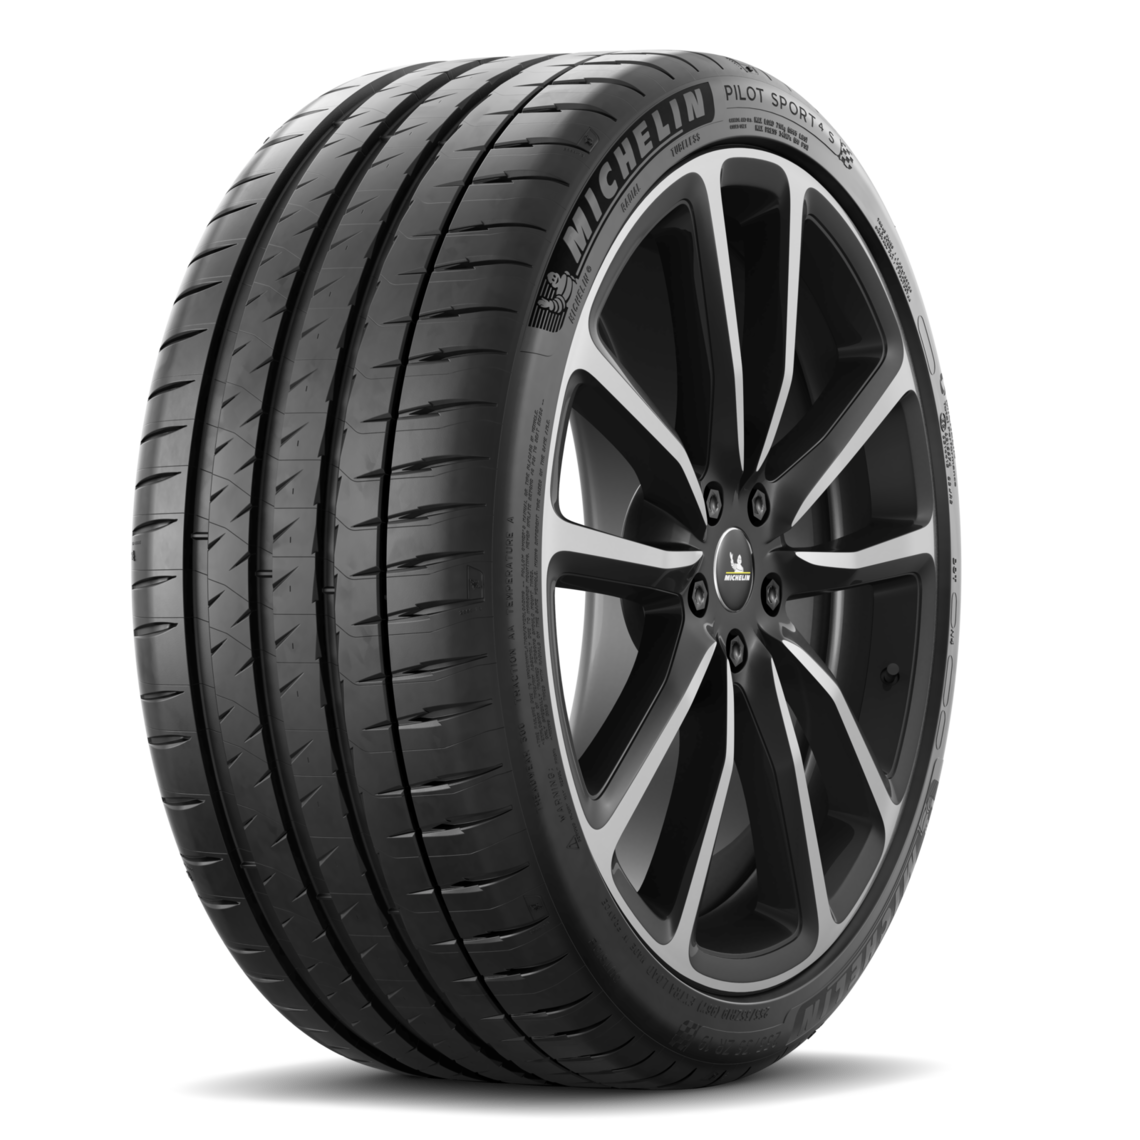 Michelin Pilot Sport 4 S - Tire Reviews and Tests